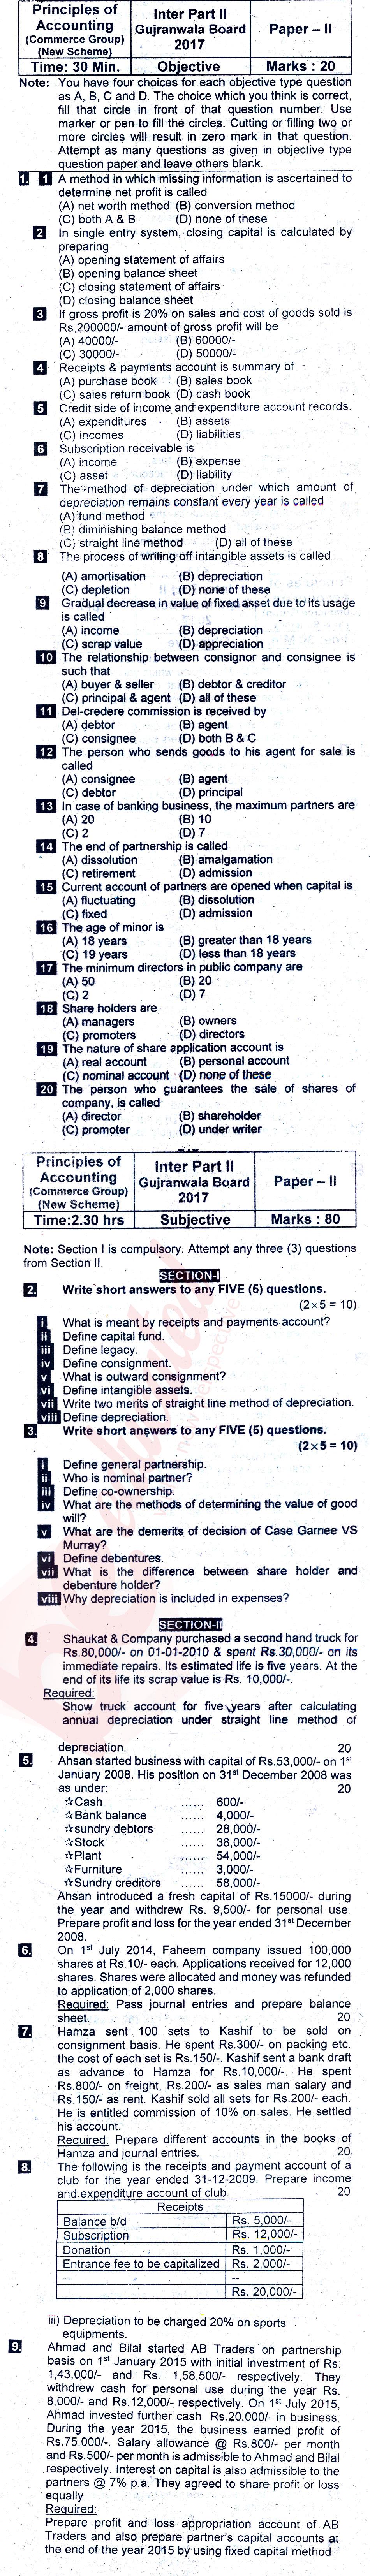 Principles of Accounting ICOM Part 2 Past Paper Group 1 BISE Gujranwala 2017